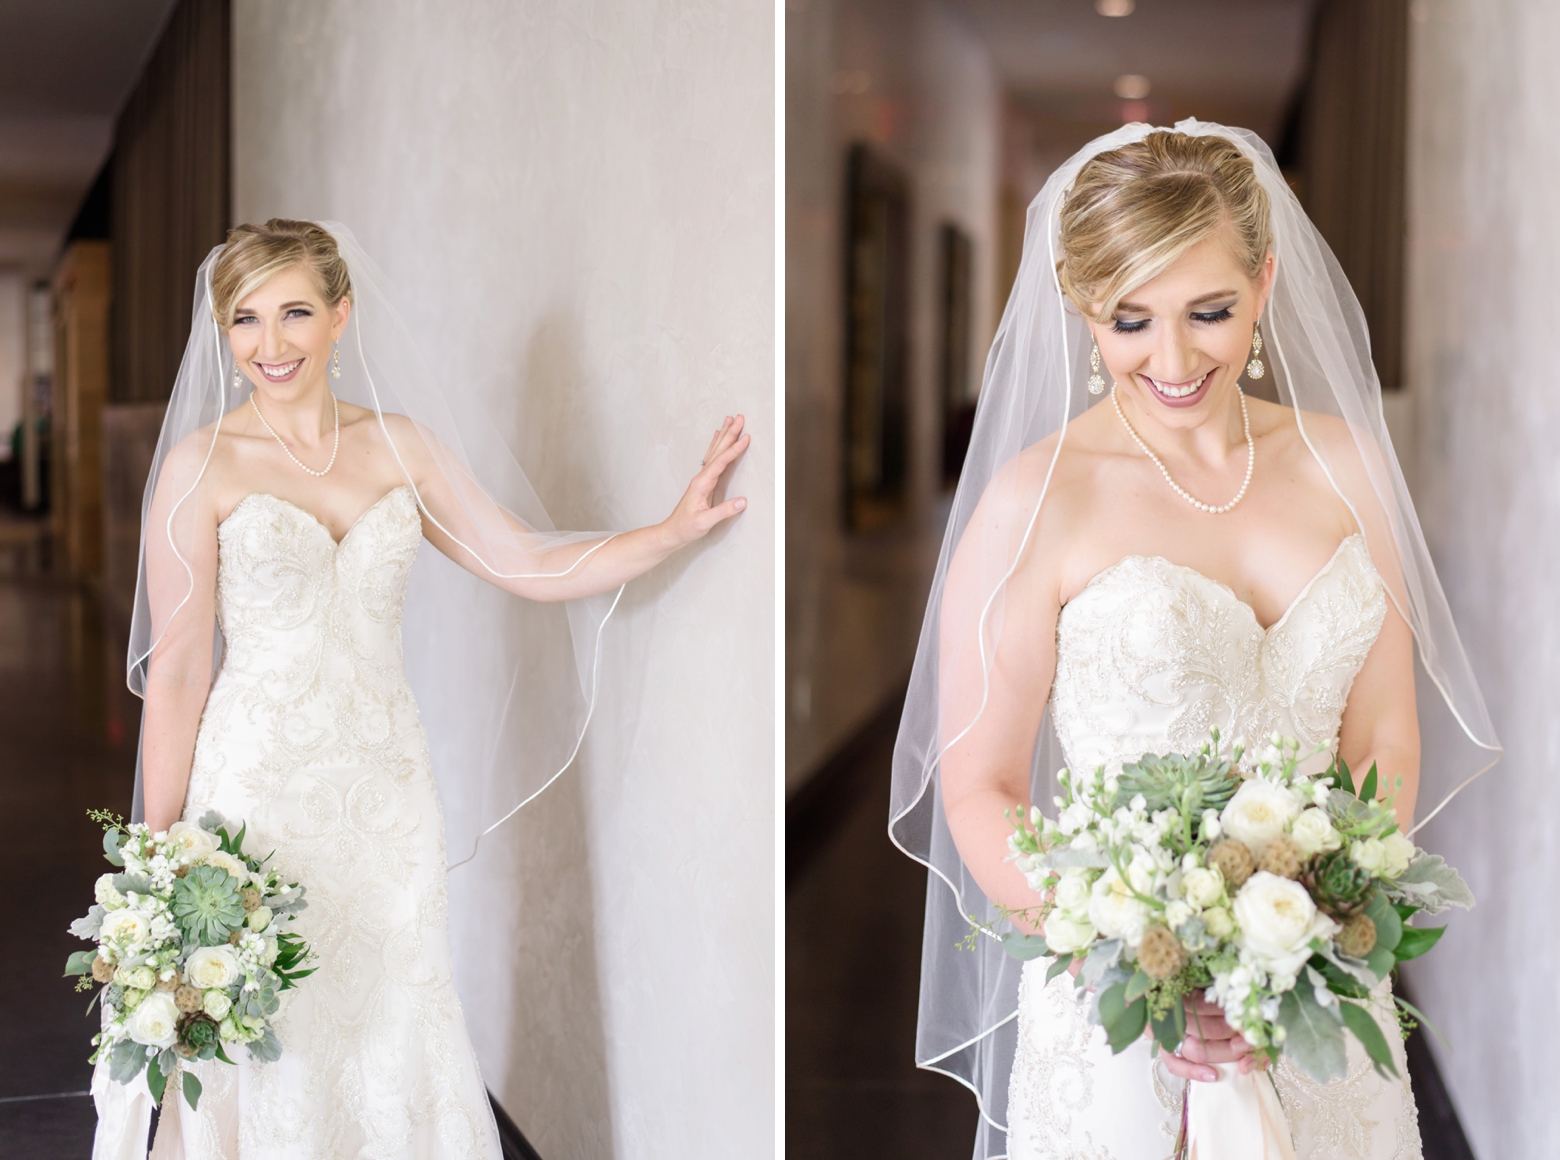 The Bride in formal portraits at the Epicurean Hotel